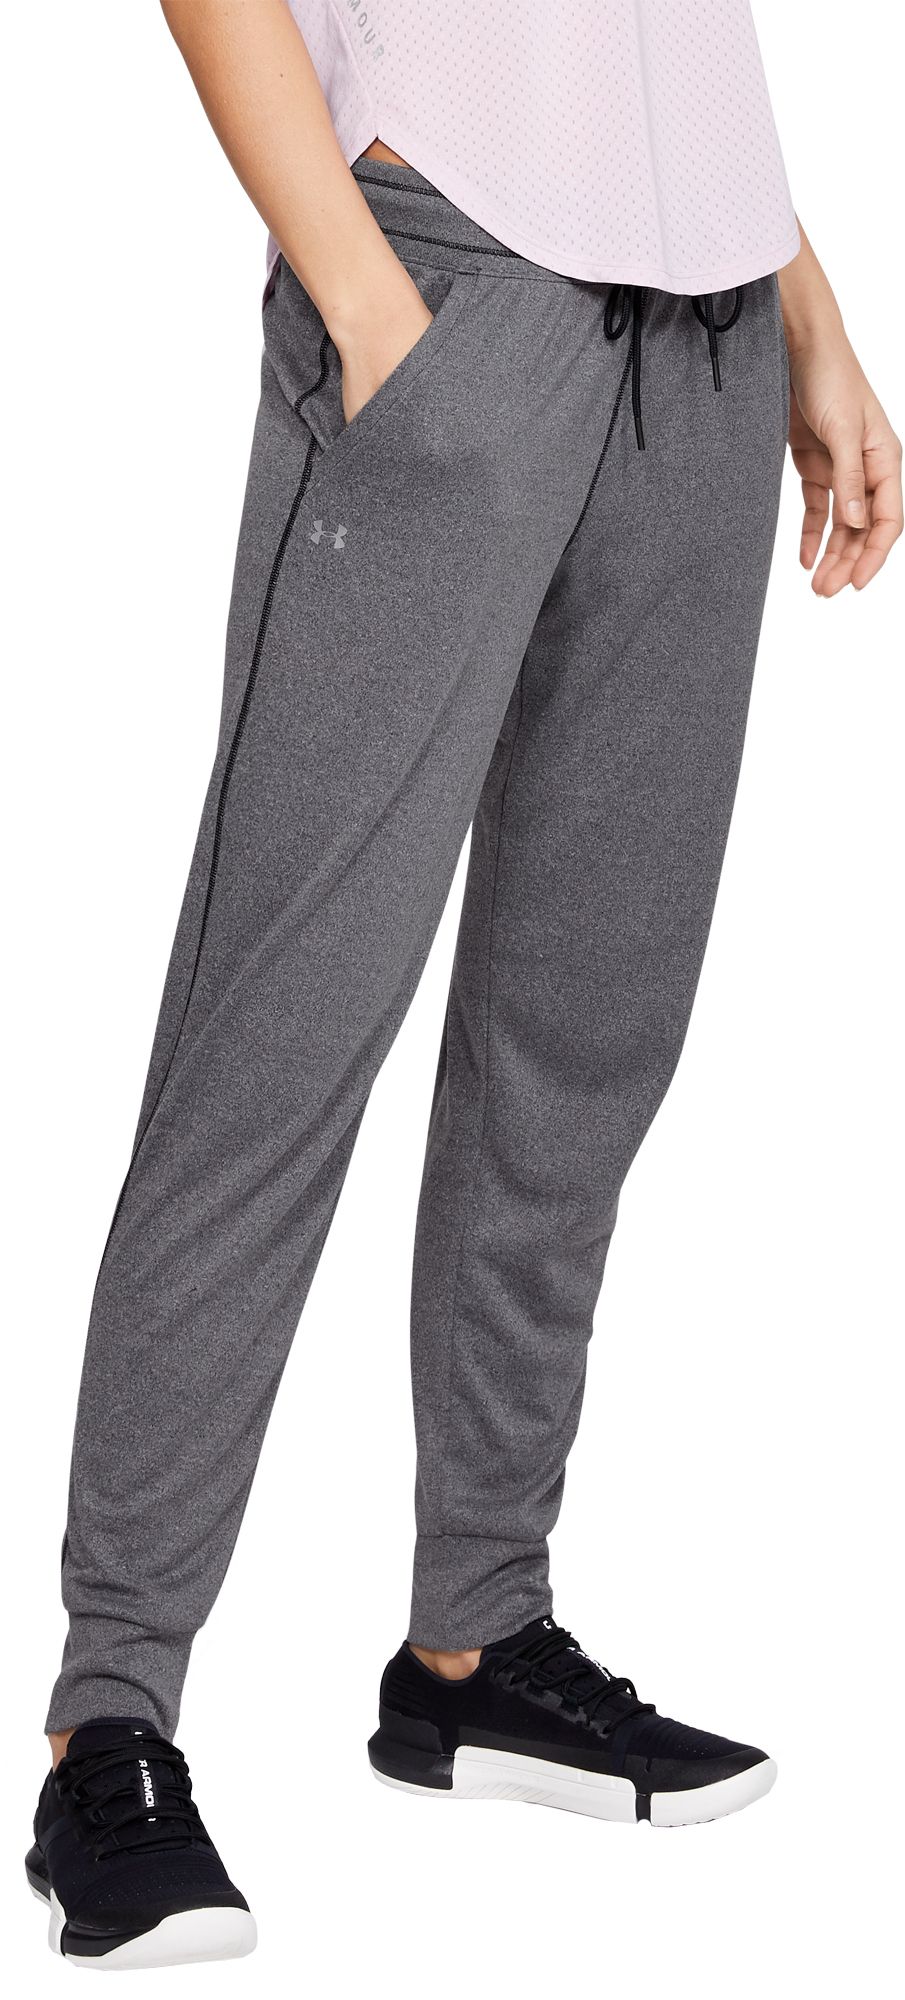 Lady's grey 3/4 length jog pants by UNDER ARMOUR Large BNWT 